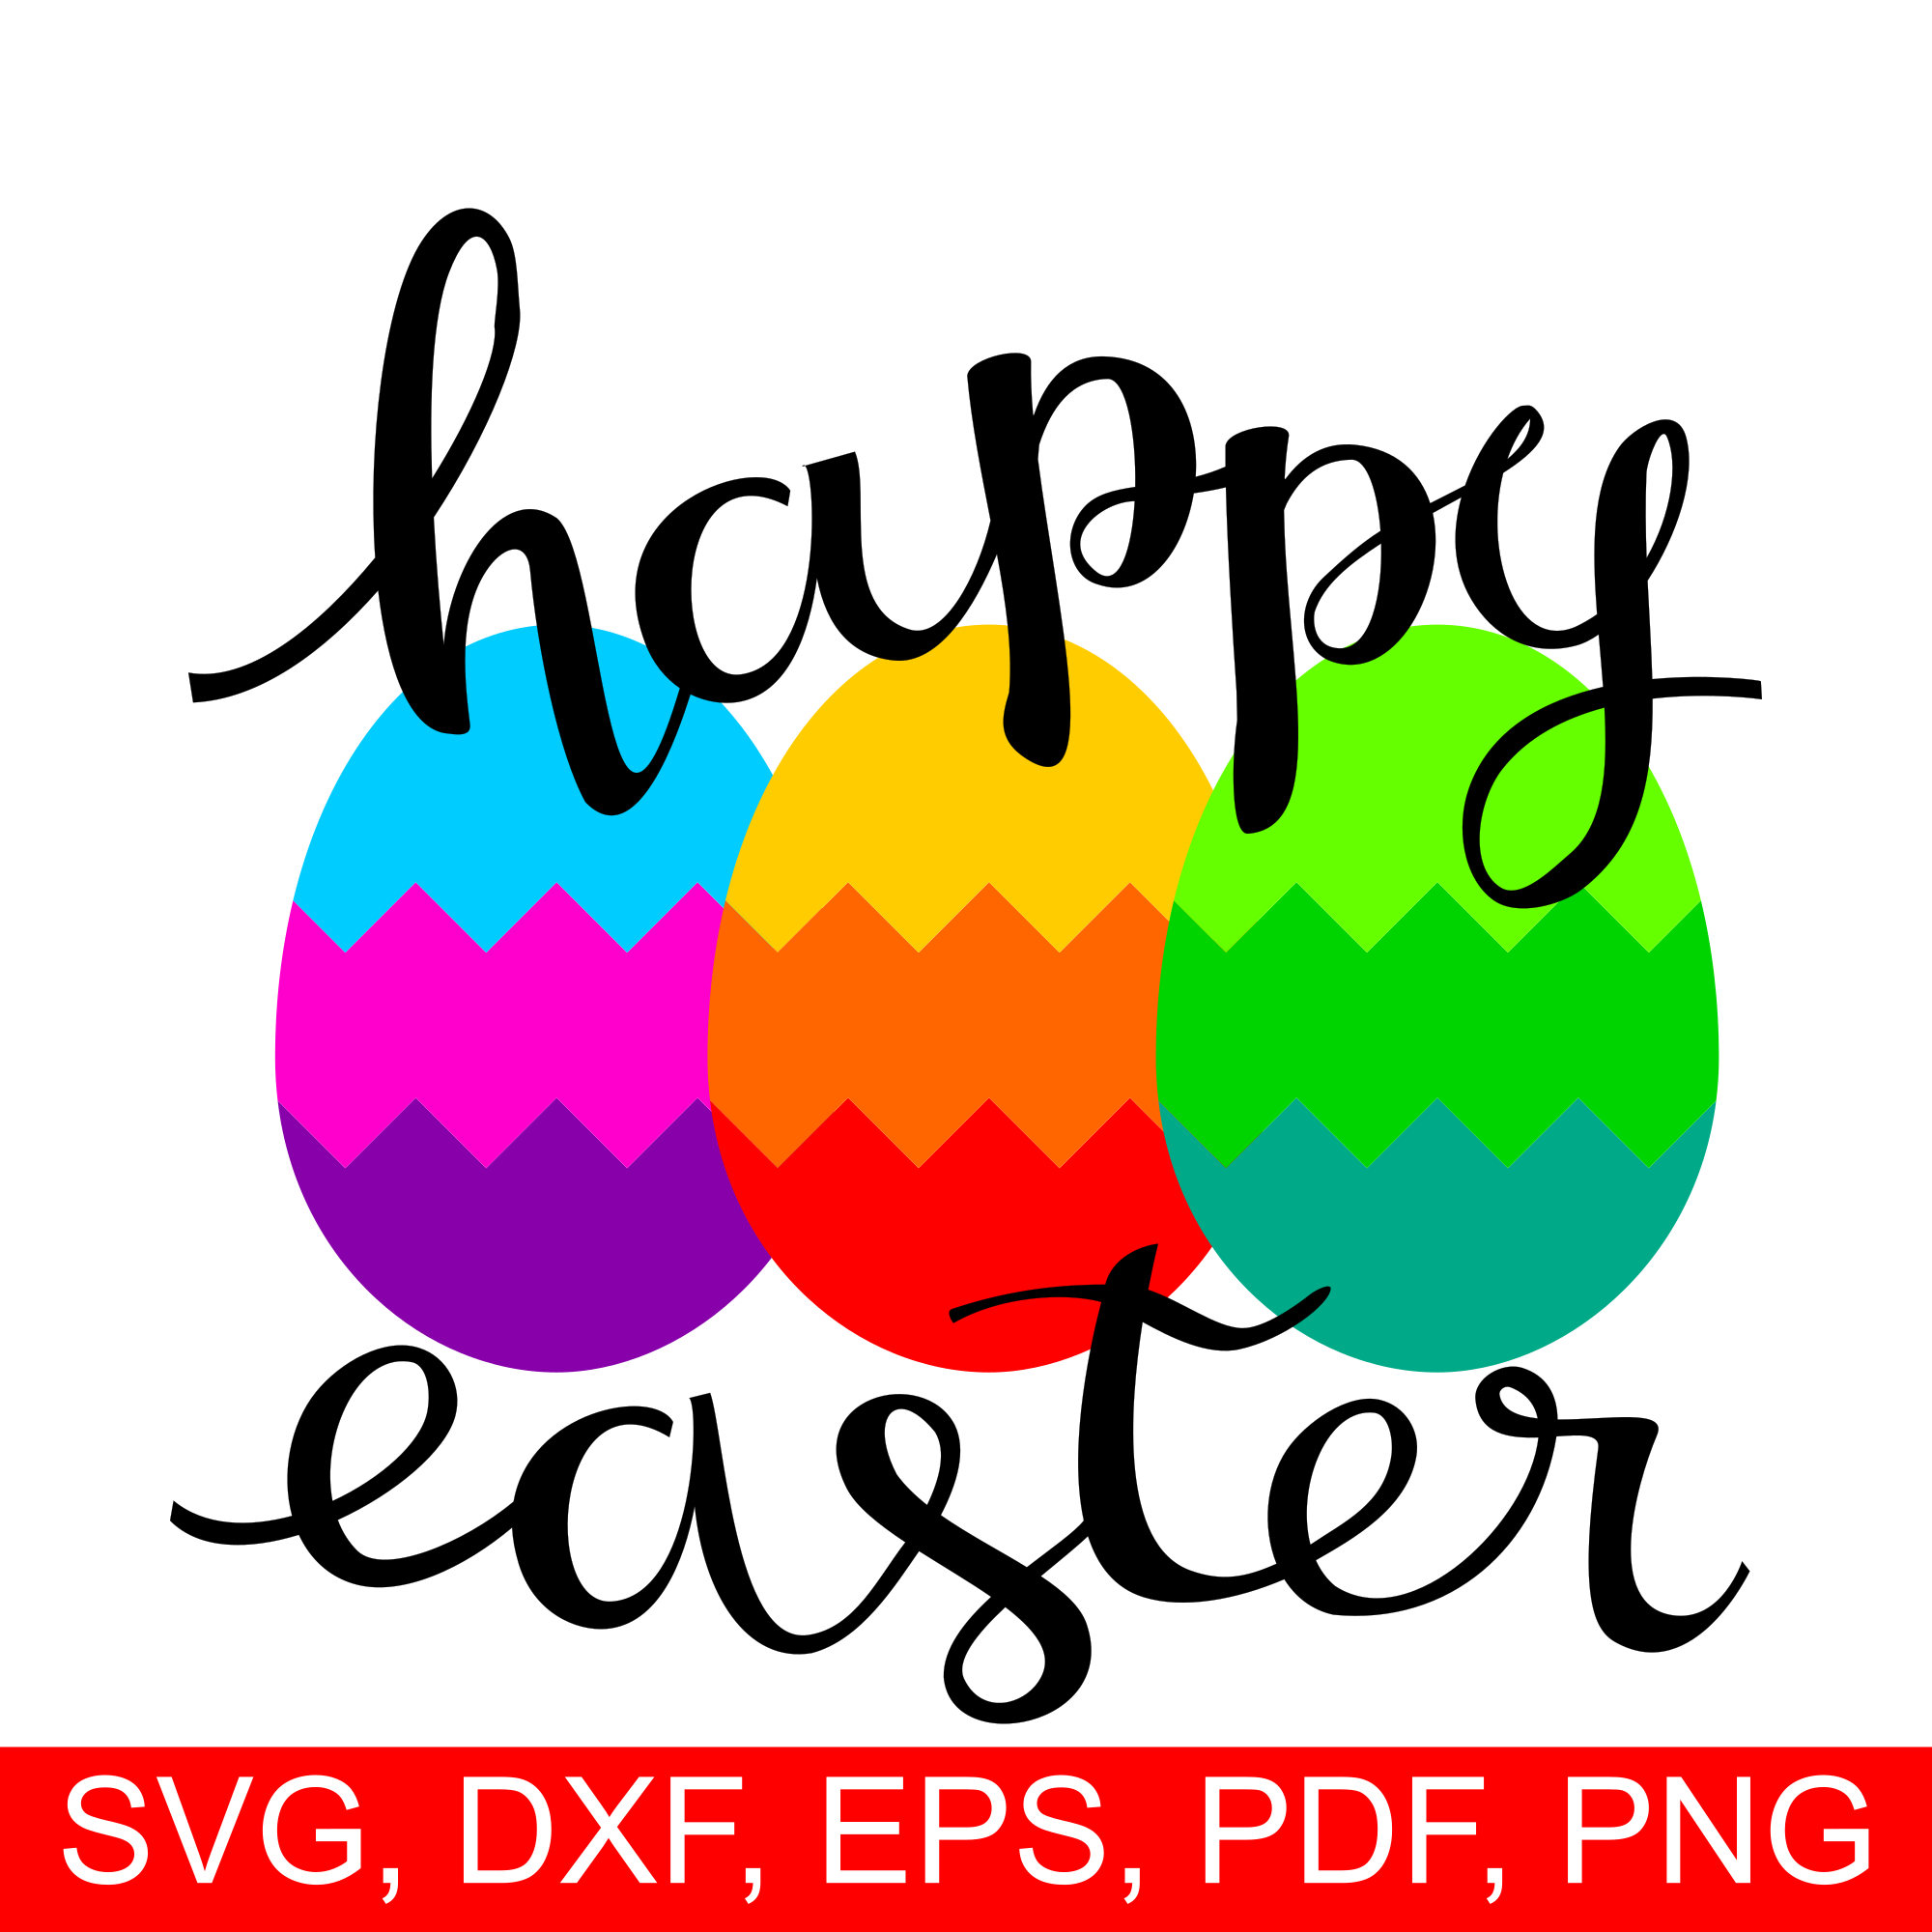 Happy Easter Eggs SVG file, Happy Easter clipart with colorful Easter